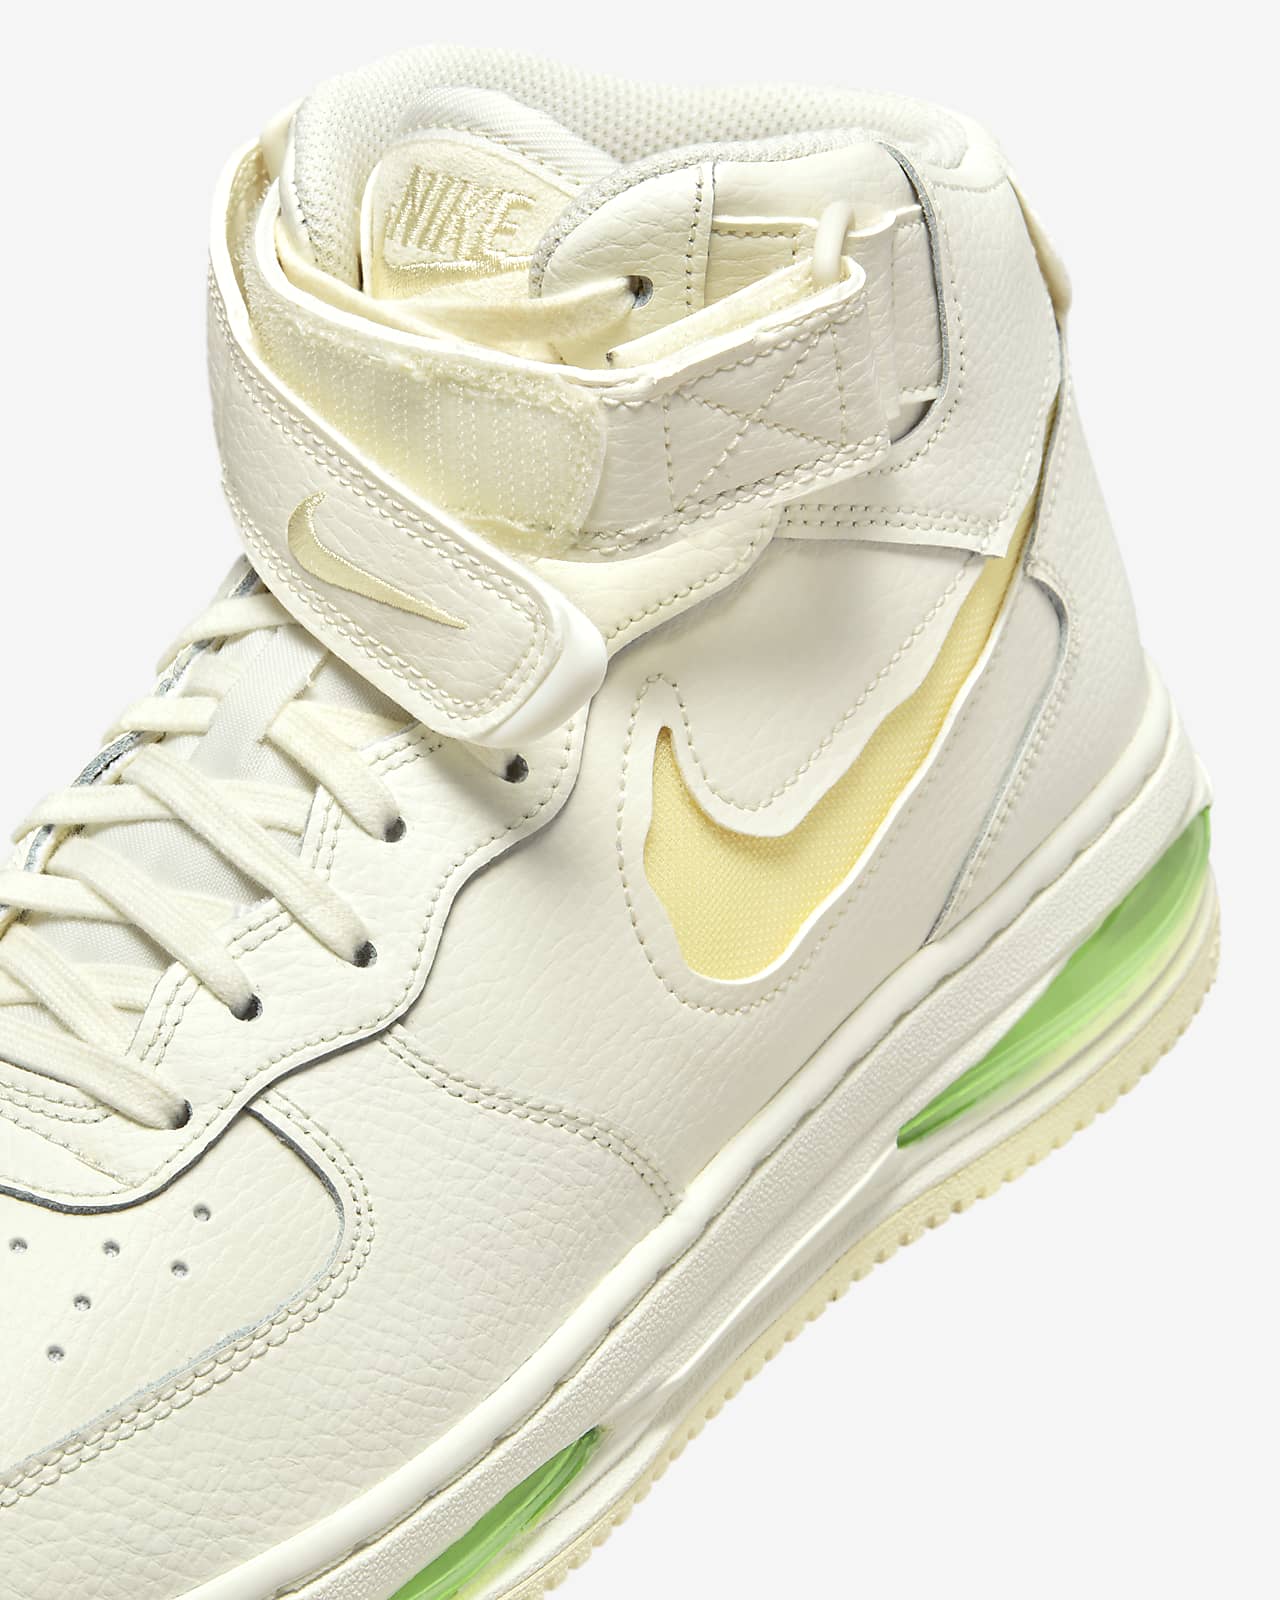 Im thinking of getting Nike air force 1 '07 lv8 world champ as a